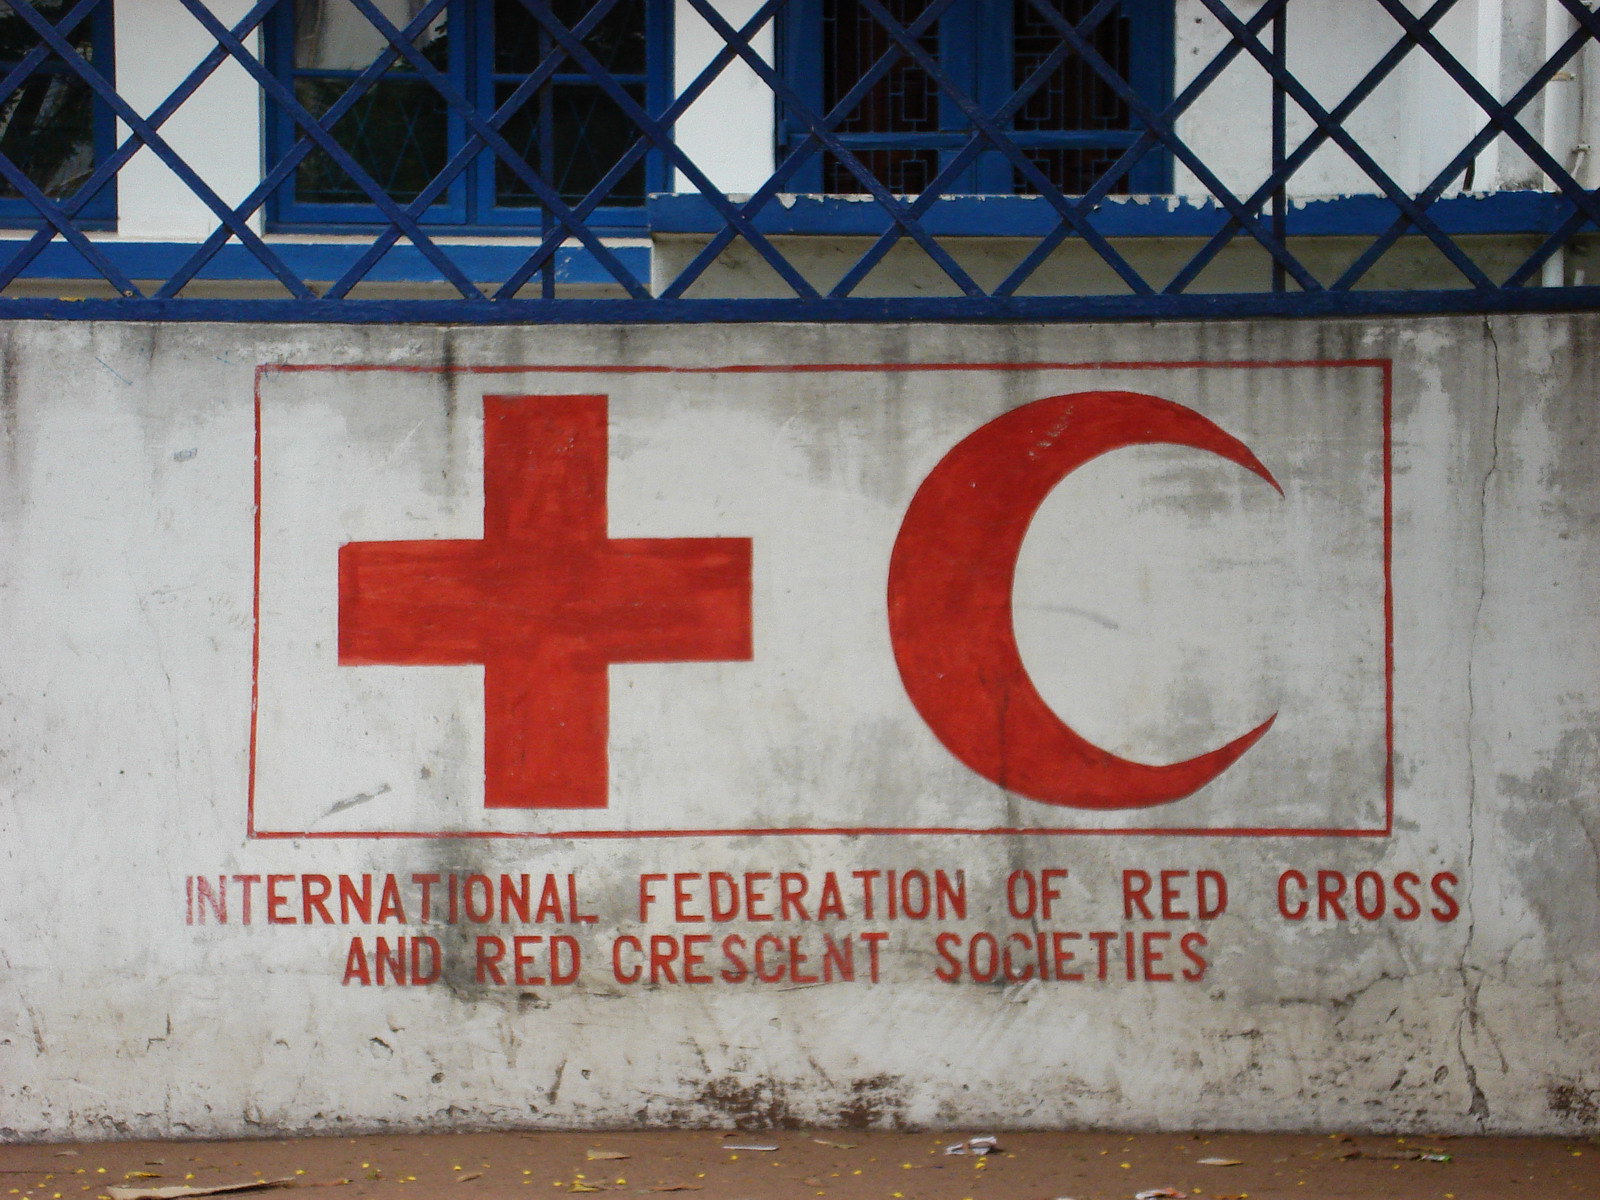 Emblems of the International Federation of the Red Cross and Crescent in Mozambique.